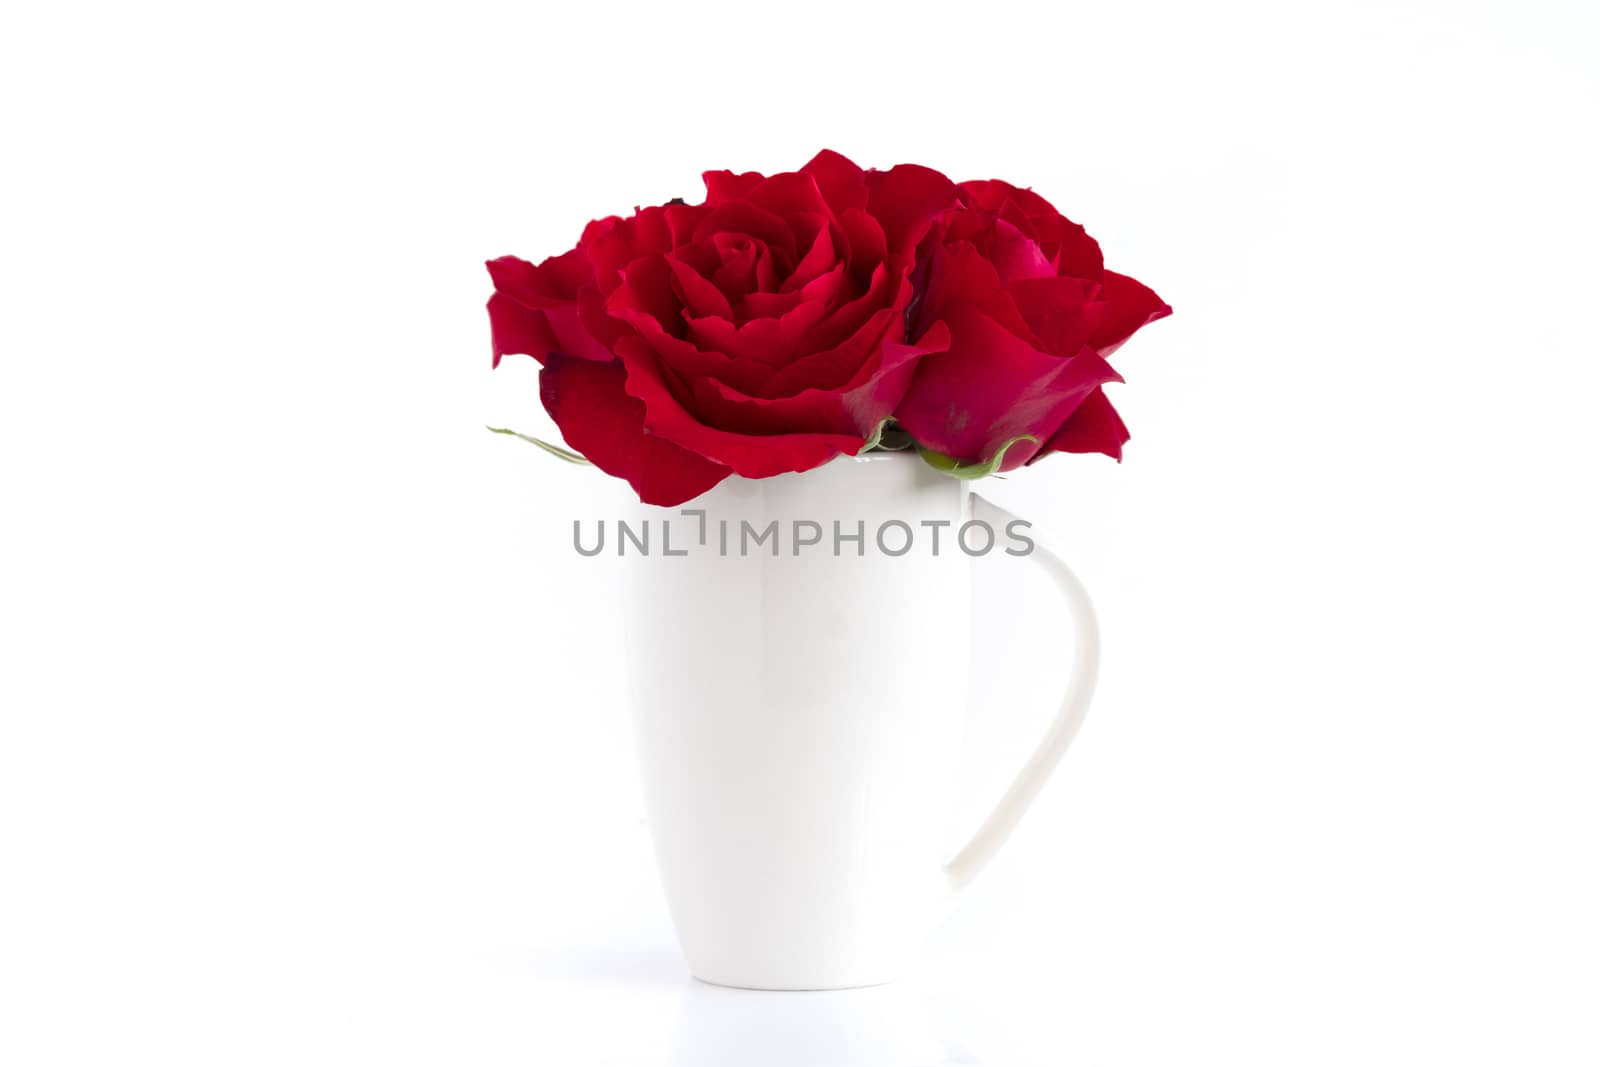 Blooming red roses in a white vase, isolated on white background.